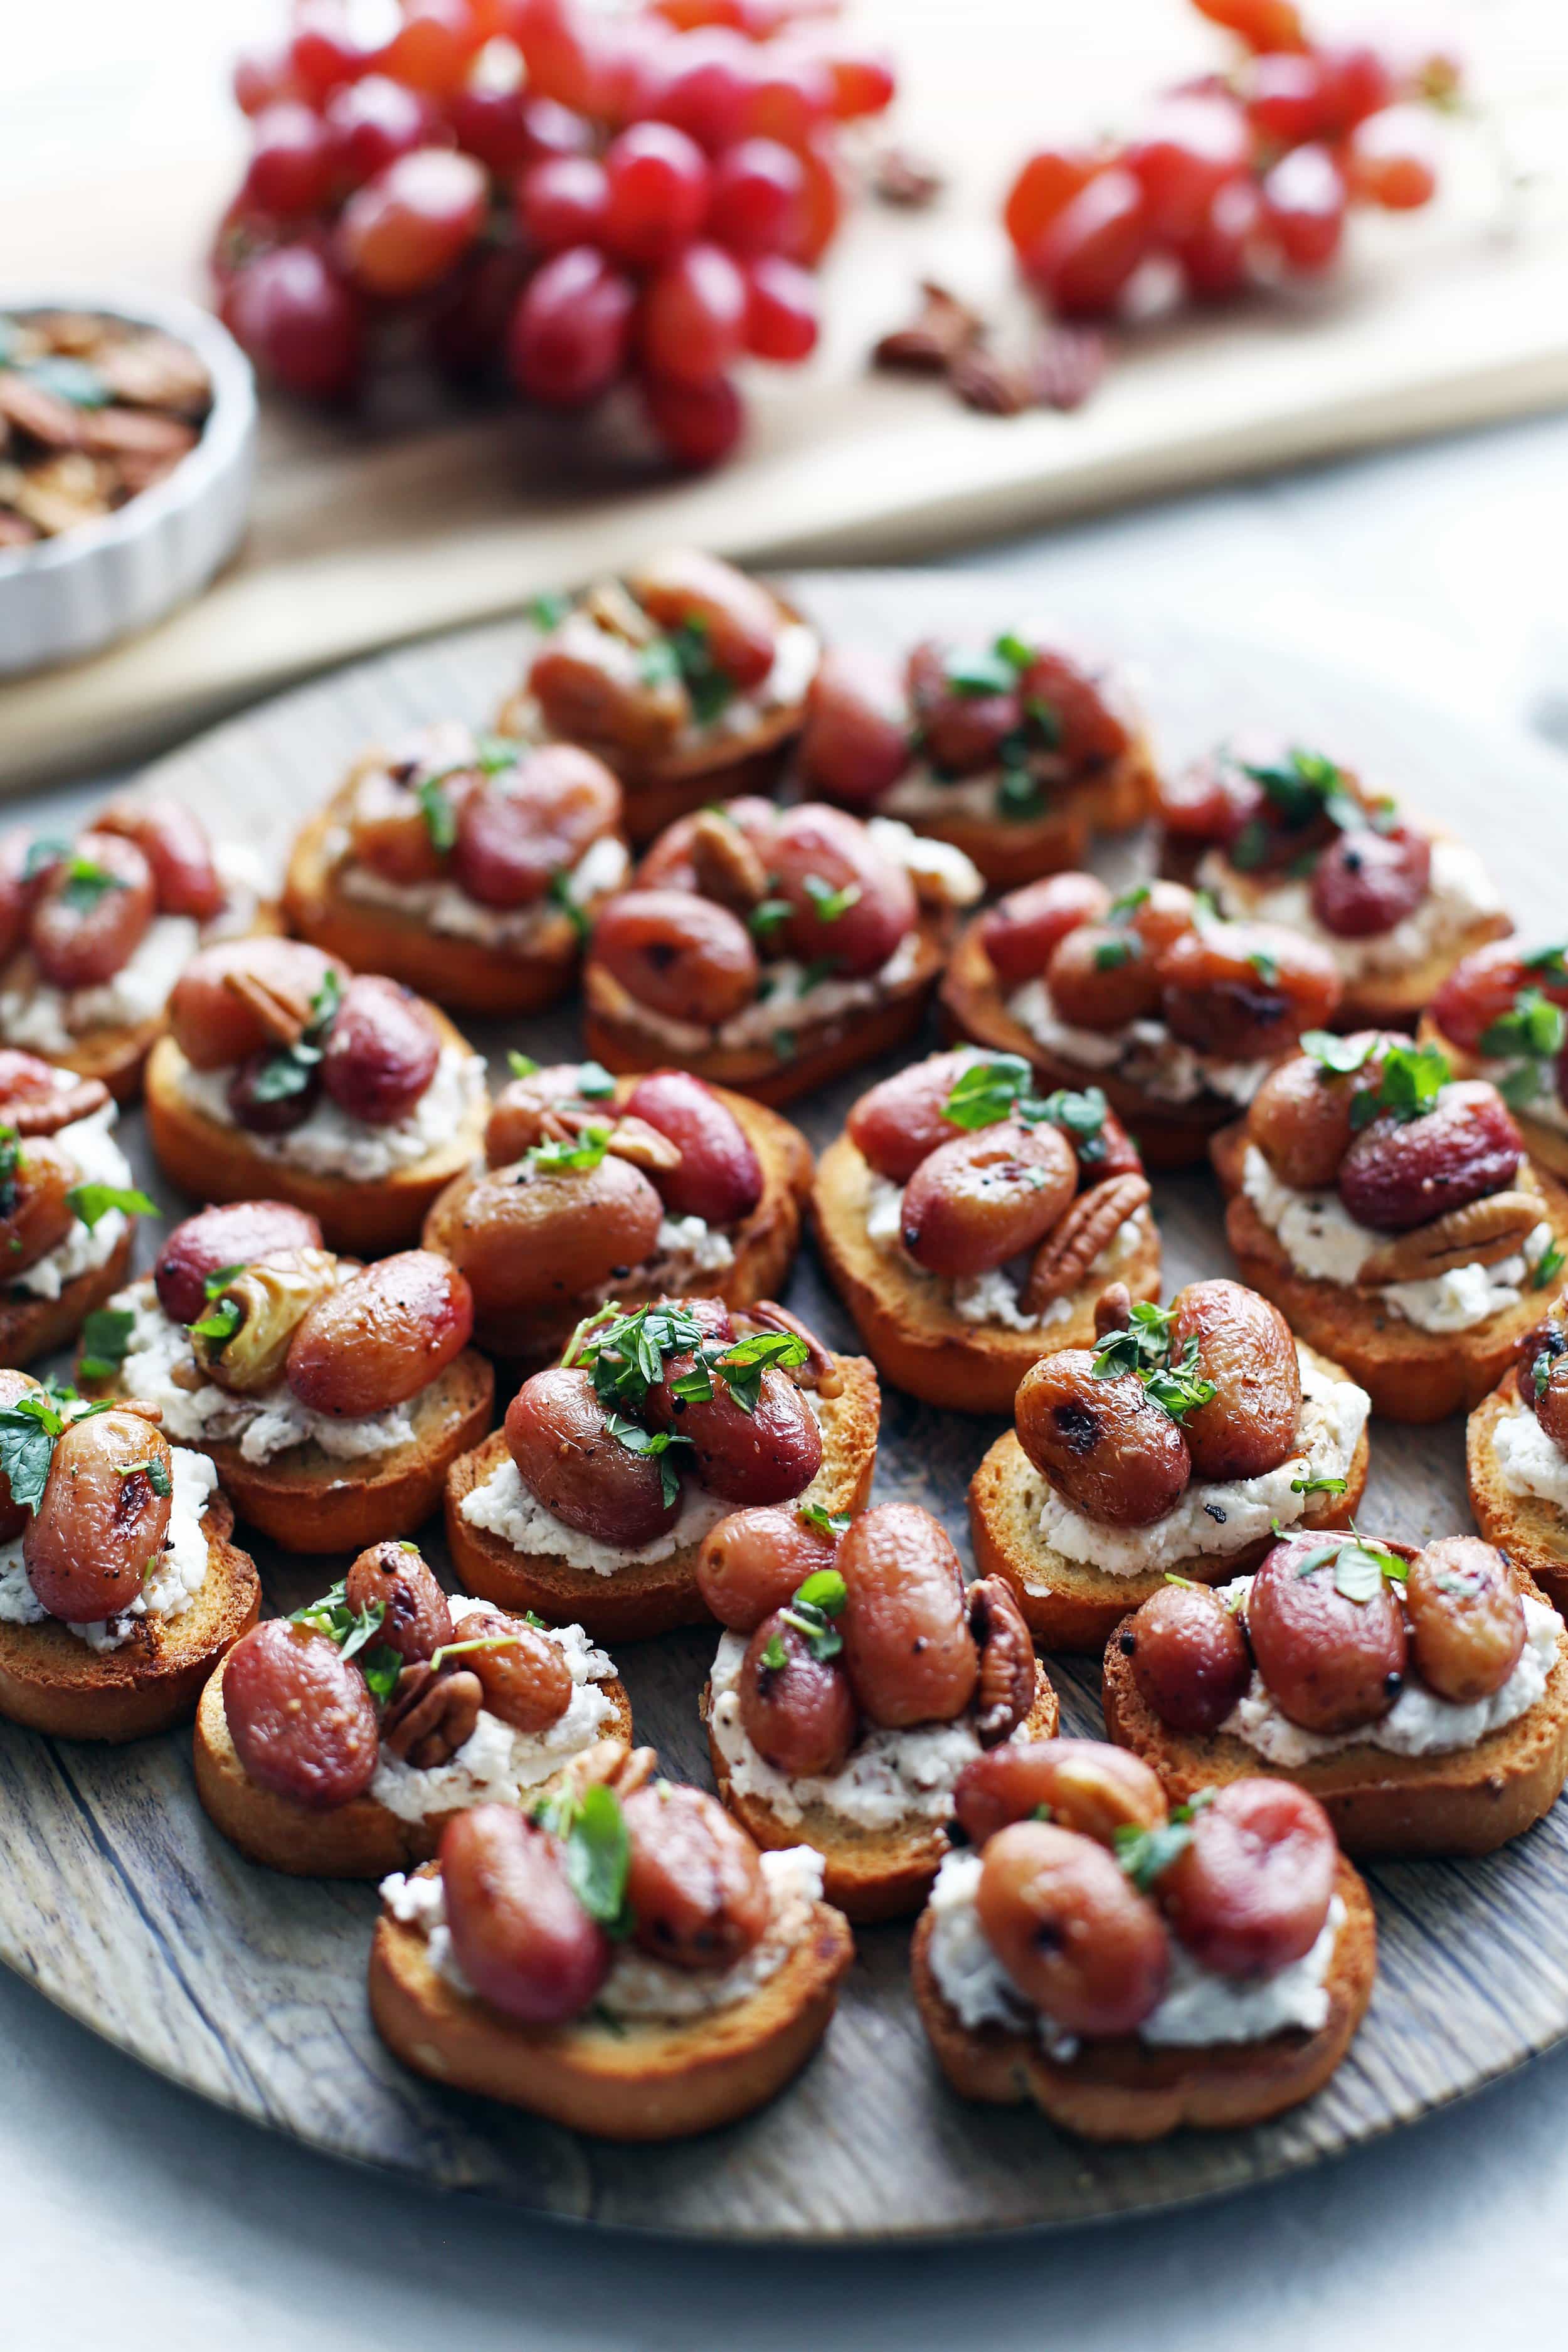 Balsamic roasted grape and goat cheese crostini, each garnished with mint and pecan pieces.